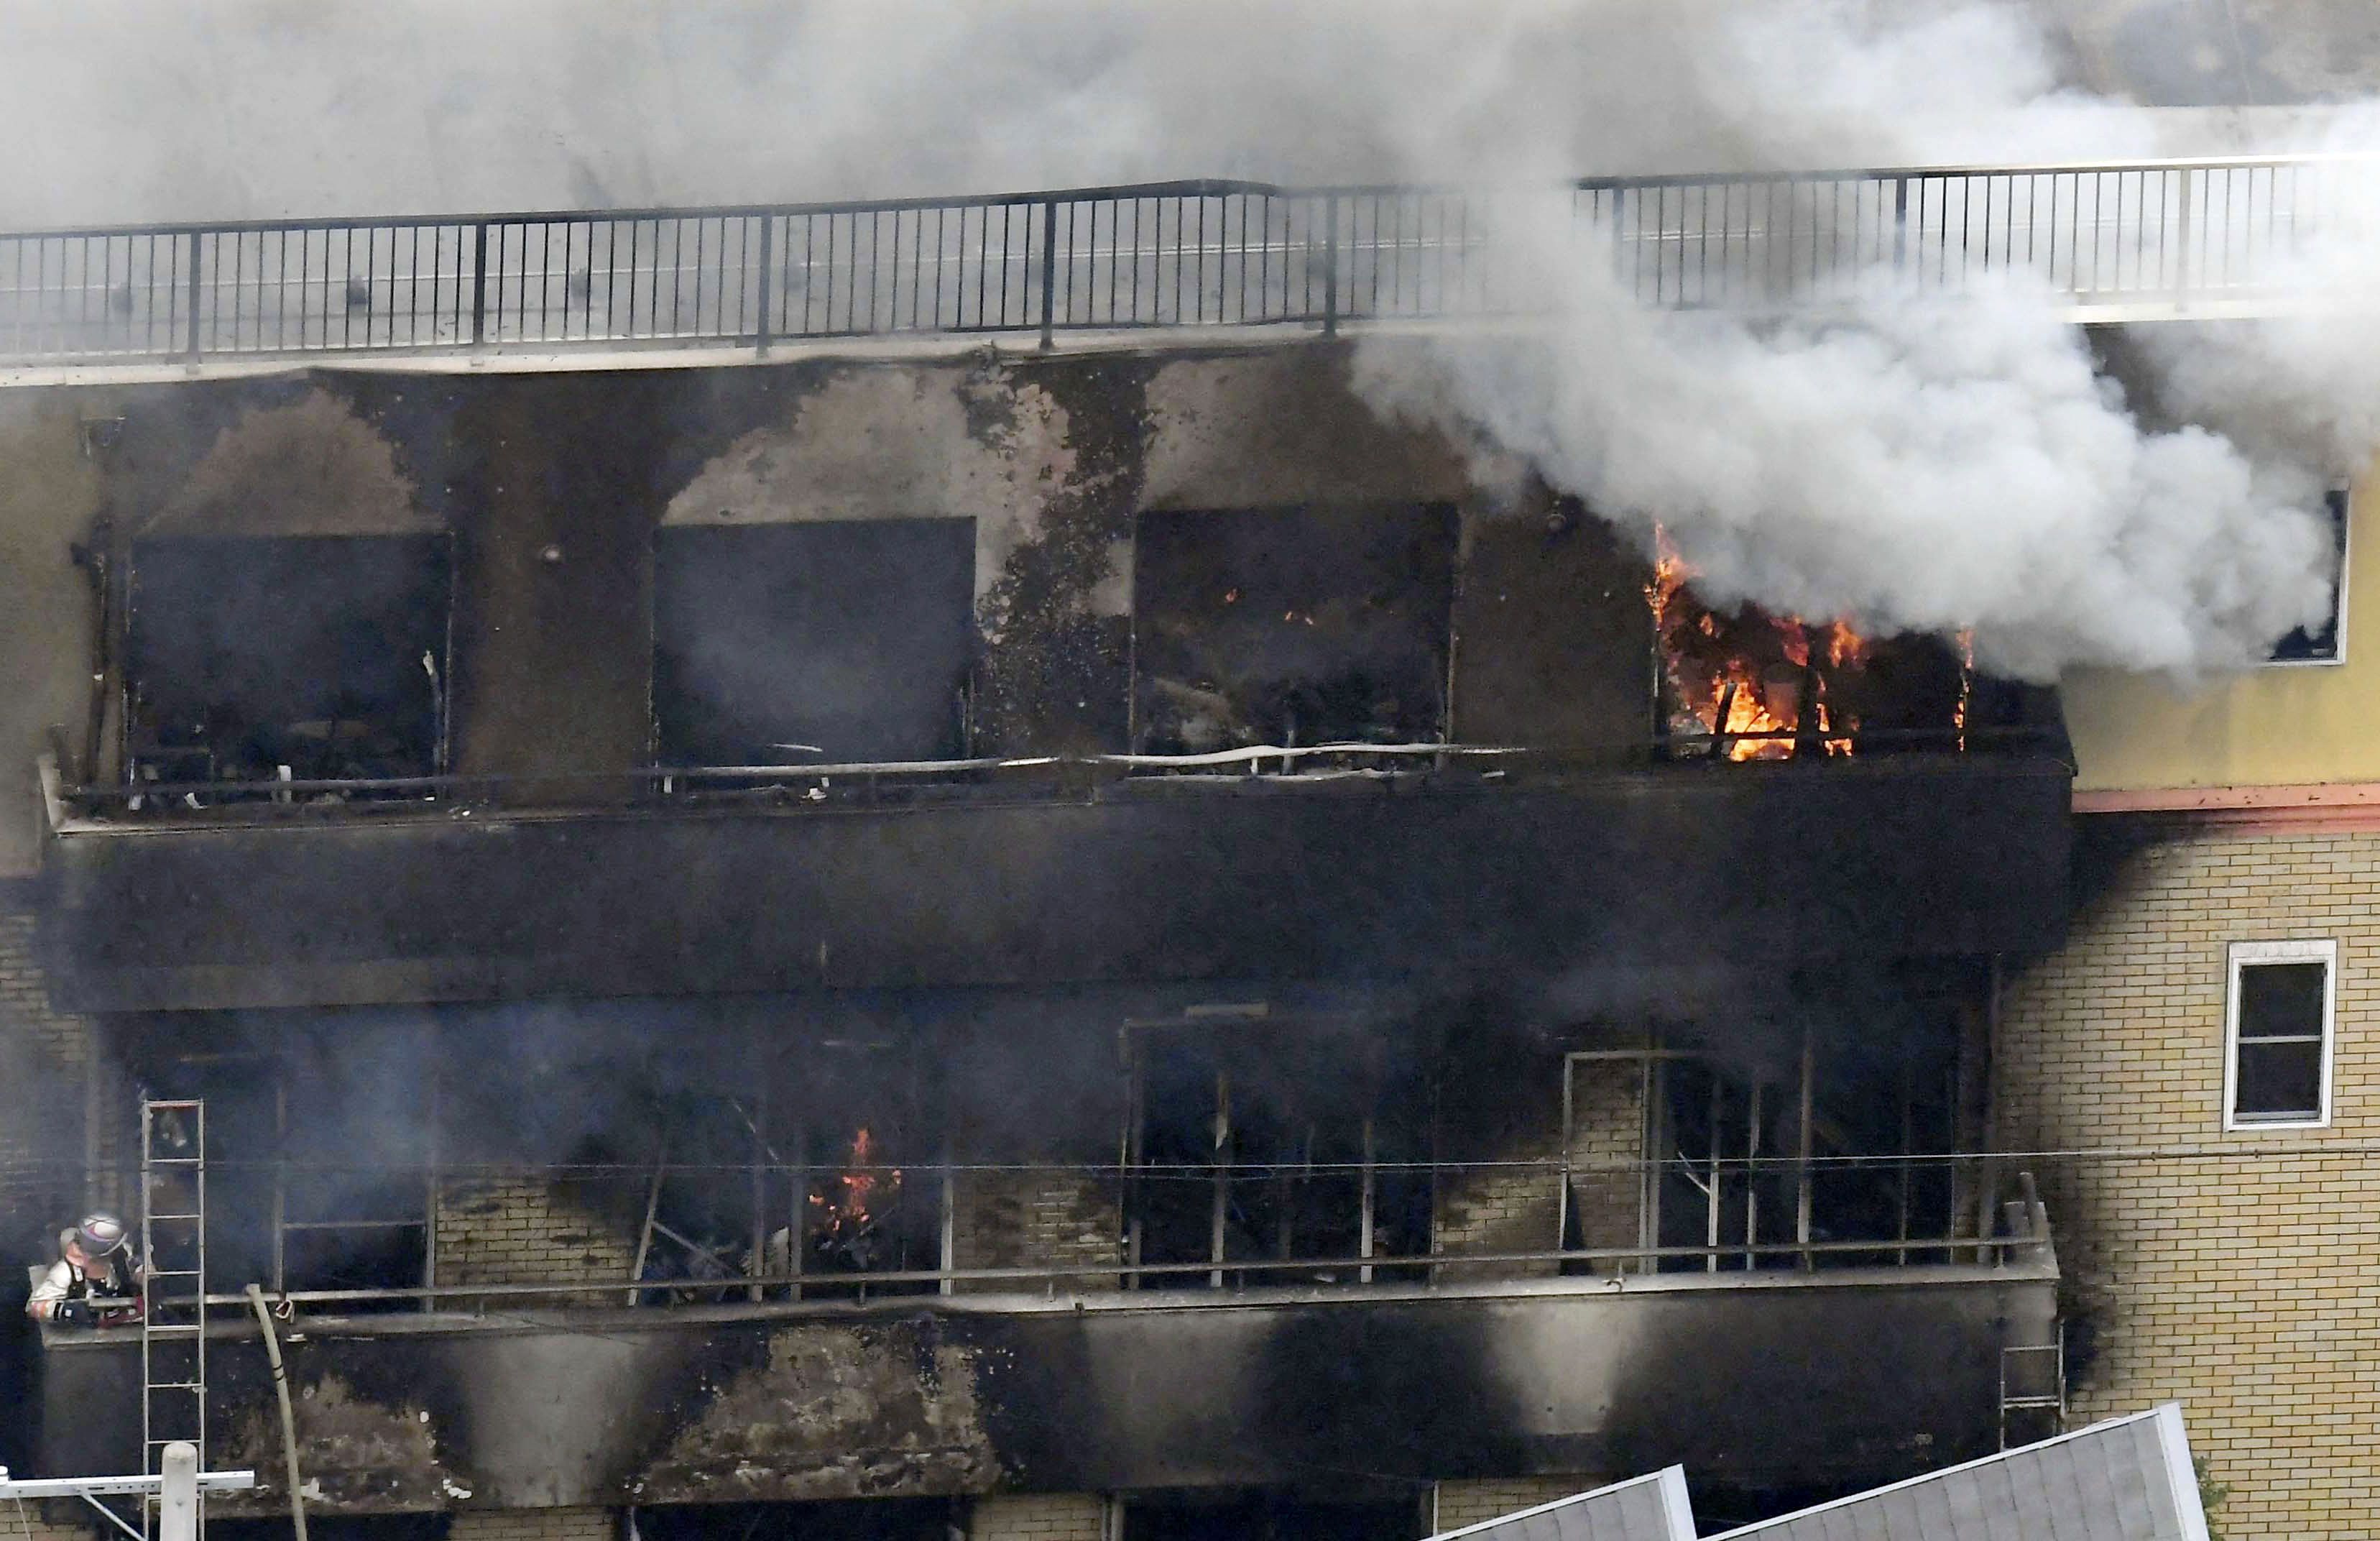 Kyoto Animation fire: 33 dead in attack at Japanese anime studio -  